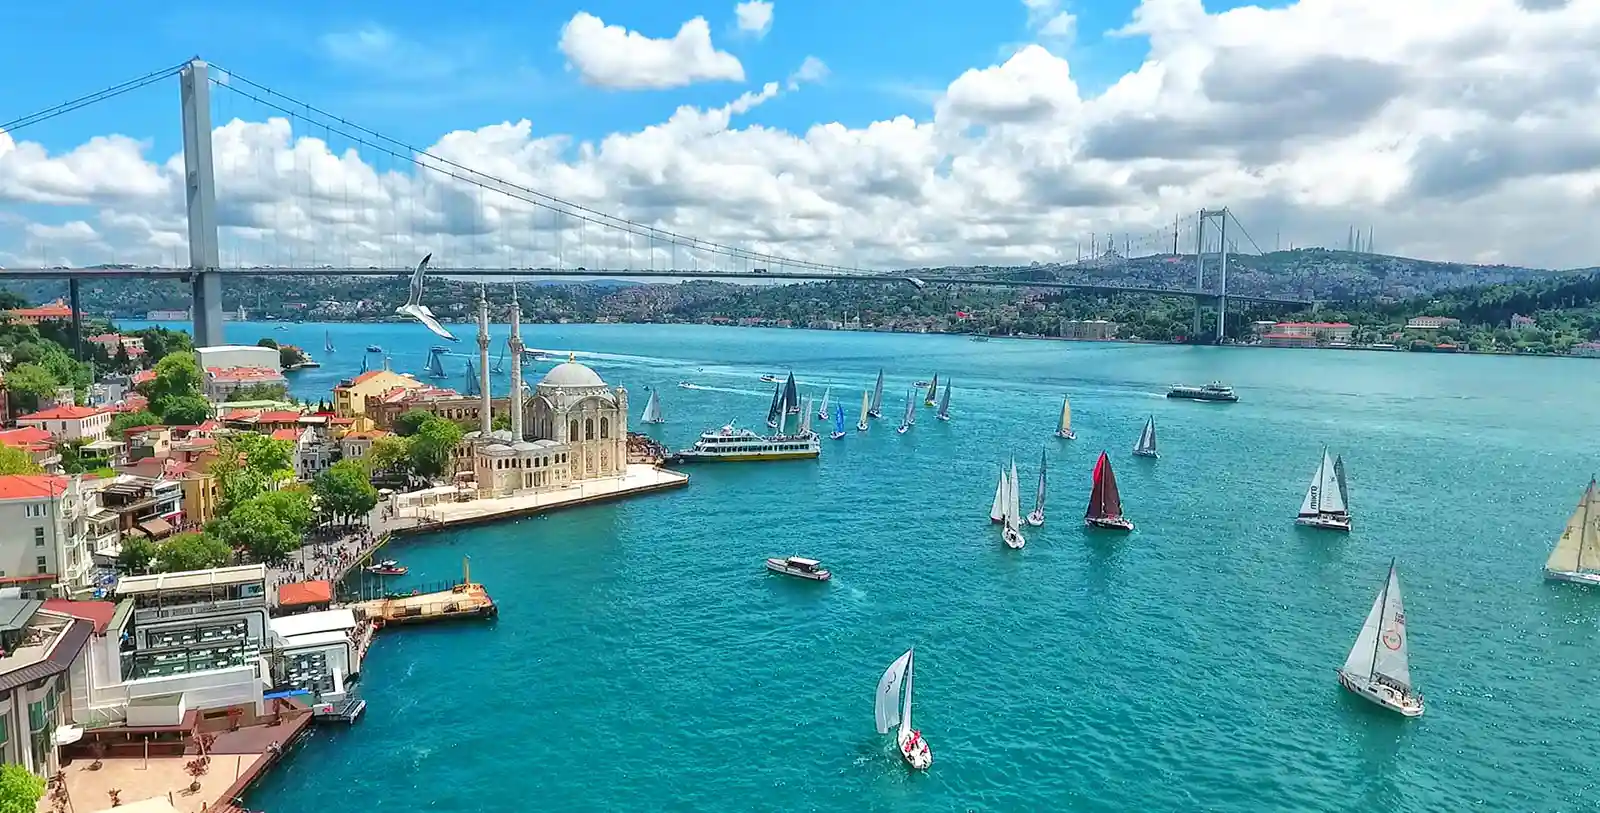 Turkey is a fast-growing country in business and tourism